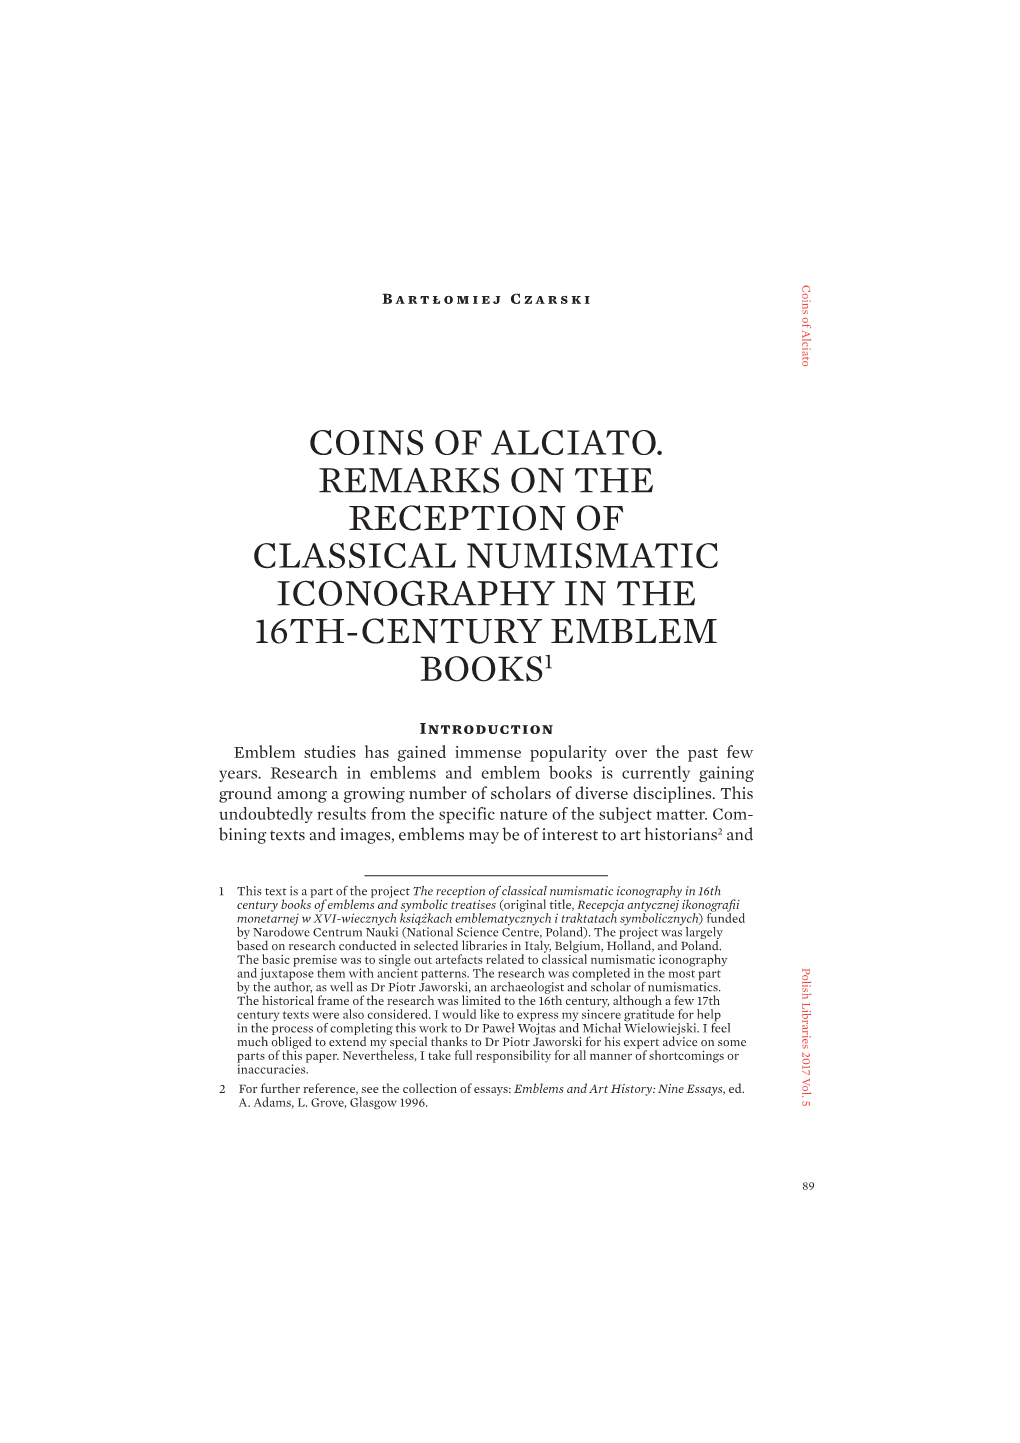 Coins of Alciato. Remarks on the Reception of Classical Numismatic Iconography in the 16Th-Century Emblem Books 1